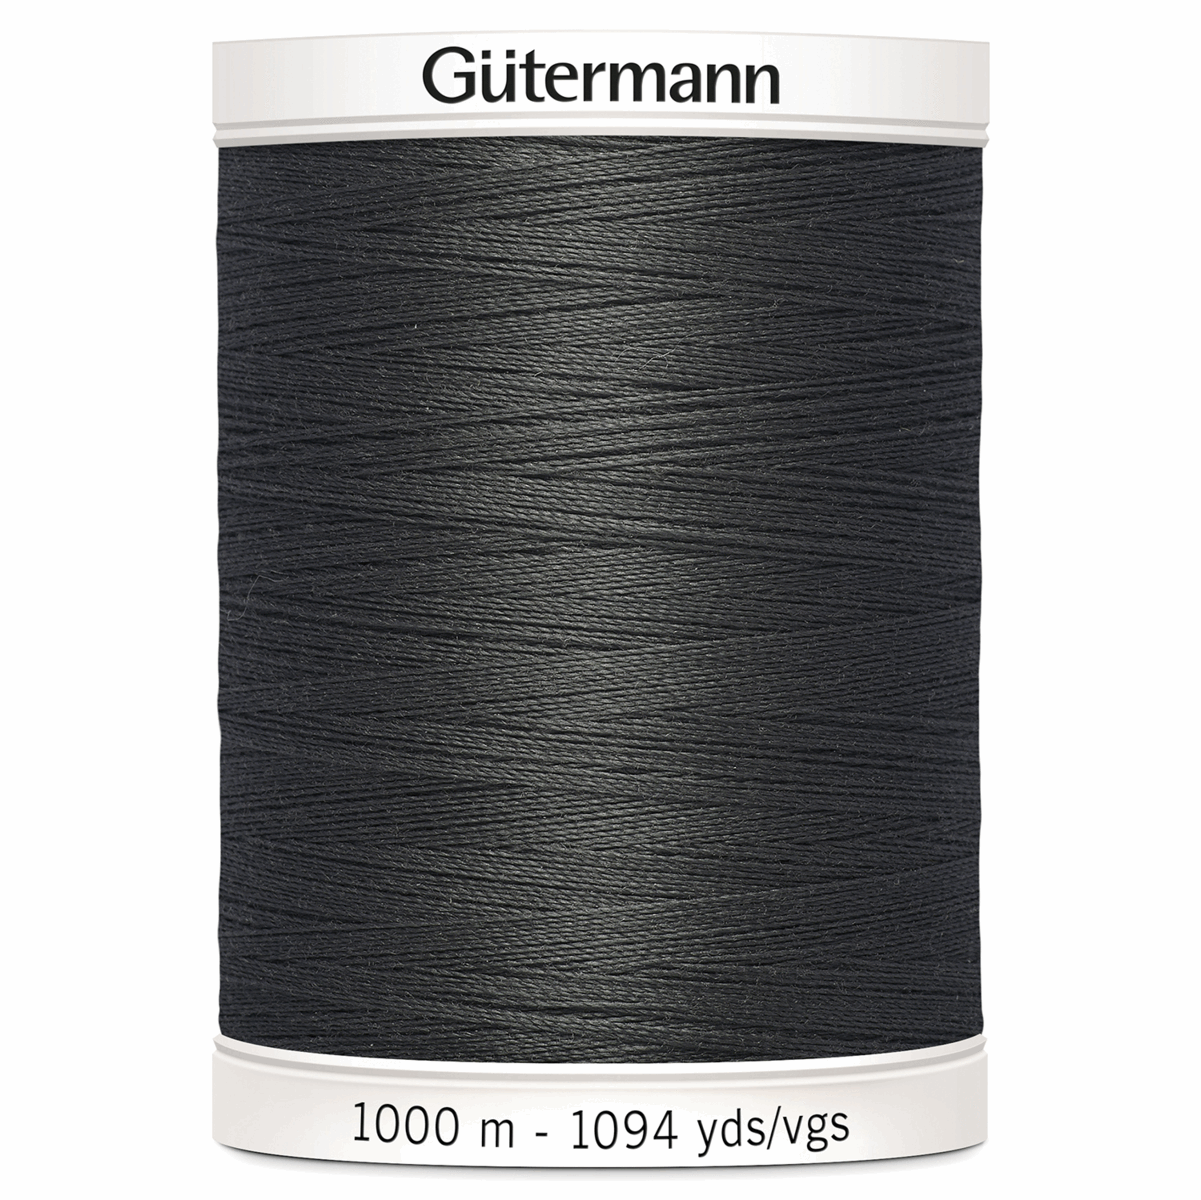 1000m size Gutermann Sew-All Thread Colour 36 | Grey from Jaycotts Sewing Supplies